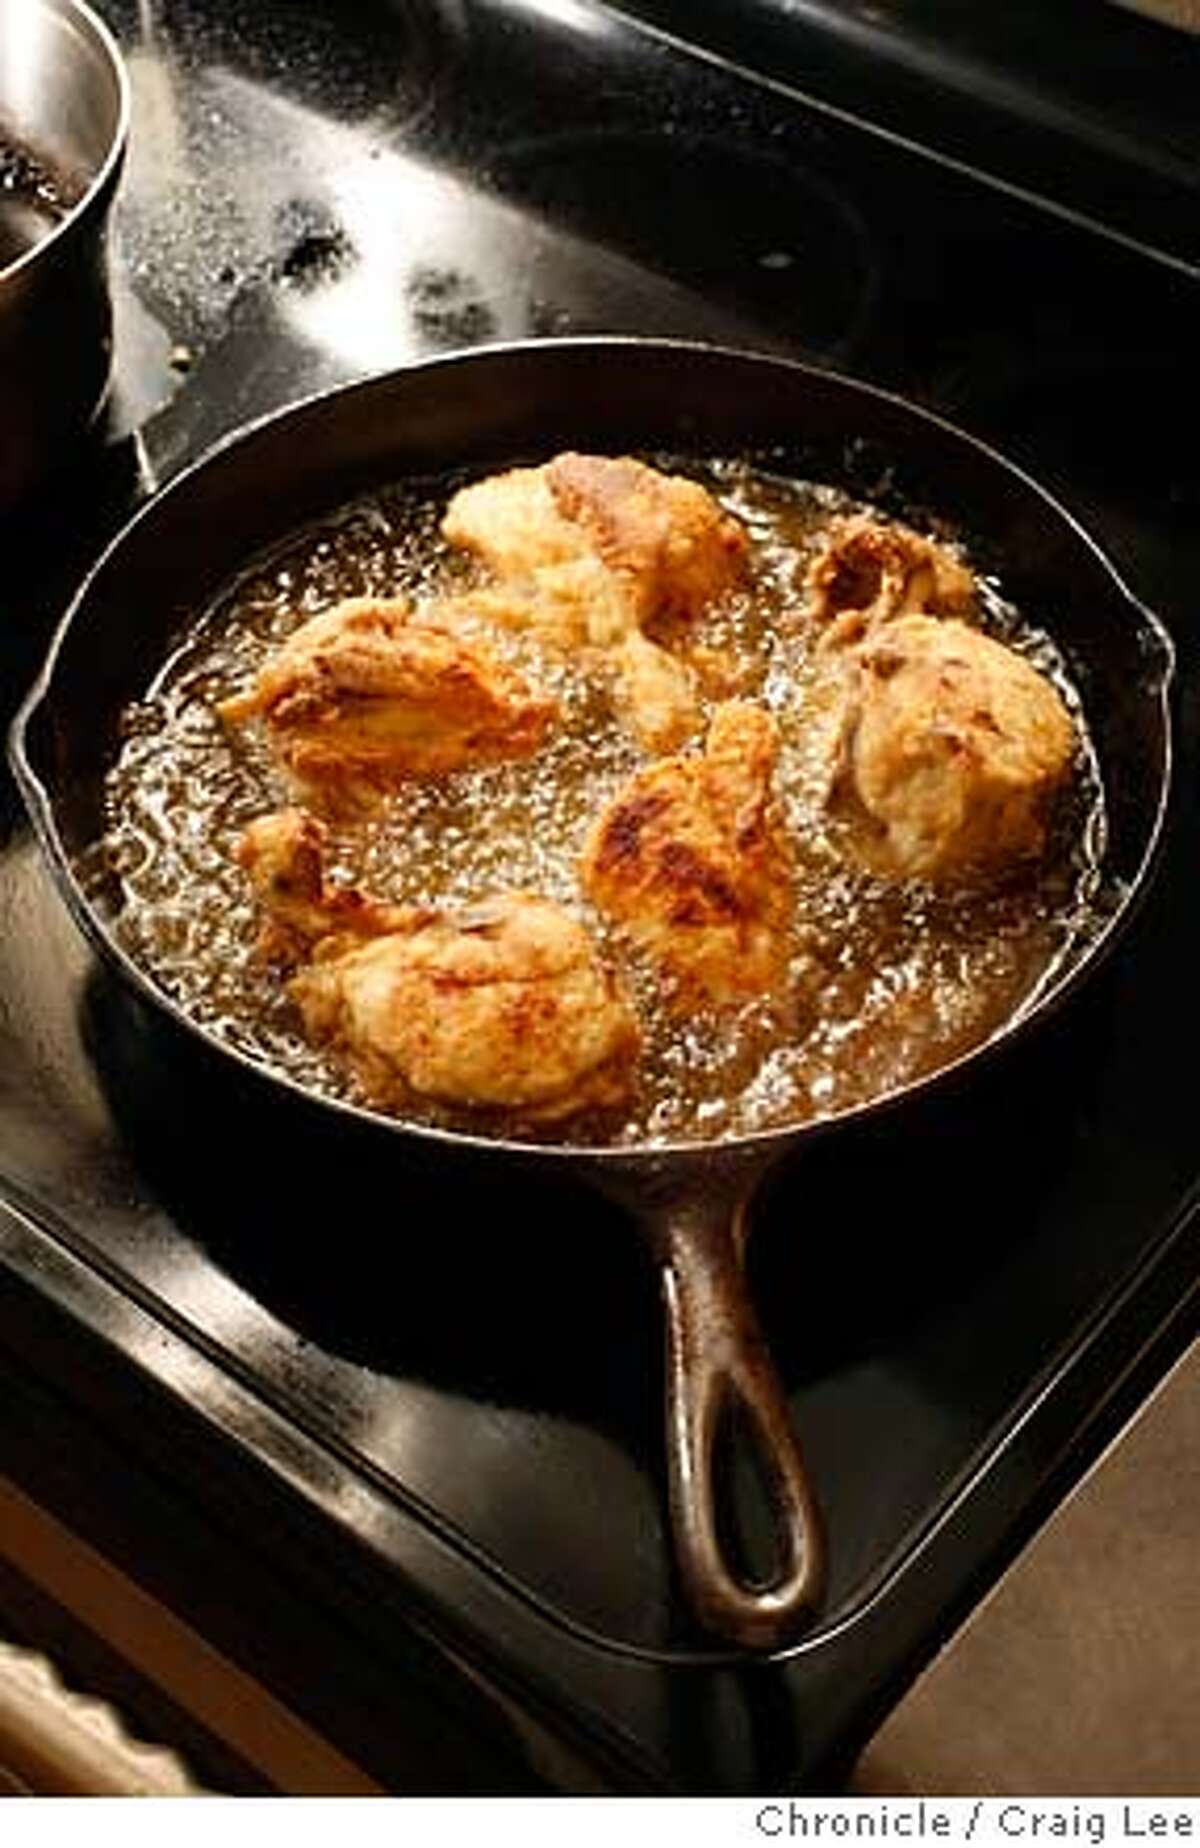 CHICKEN17_085_cl.JPG Photo for story on fried chicken. Food photo styled by Amanda Gold. Photo of "Best Way Chicken" in the frying pan. Event on 1/5/07 in San Francisco. photo by Craig Lee / The Chronicle